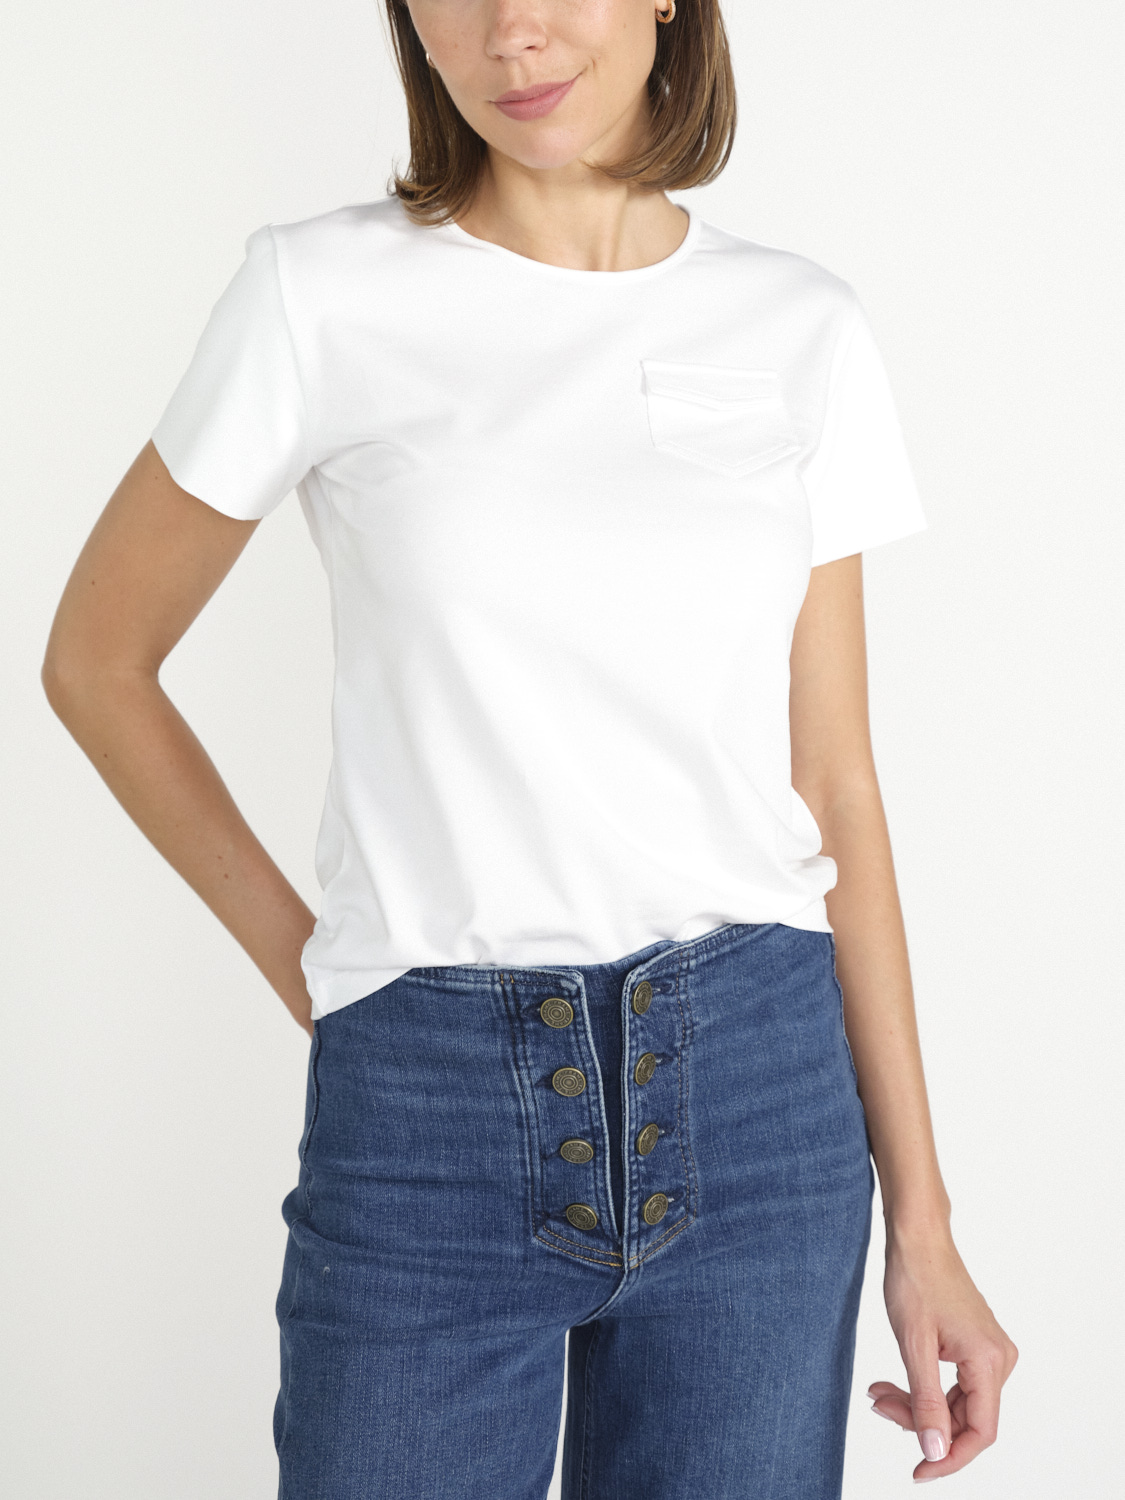 All Time Favorite – Stretchy cotton shirt 